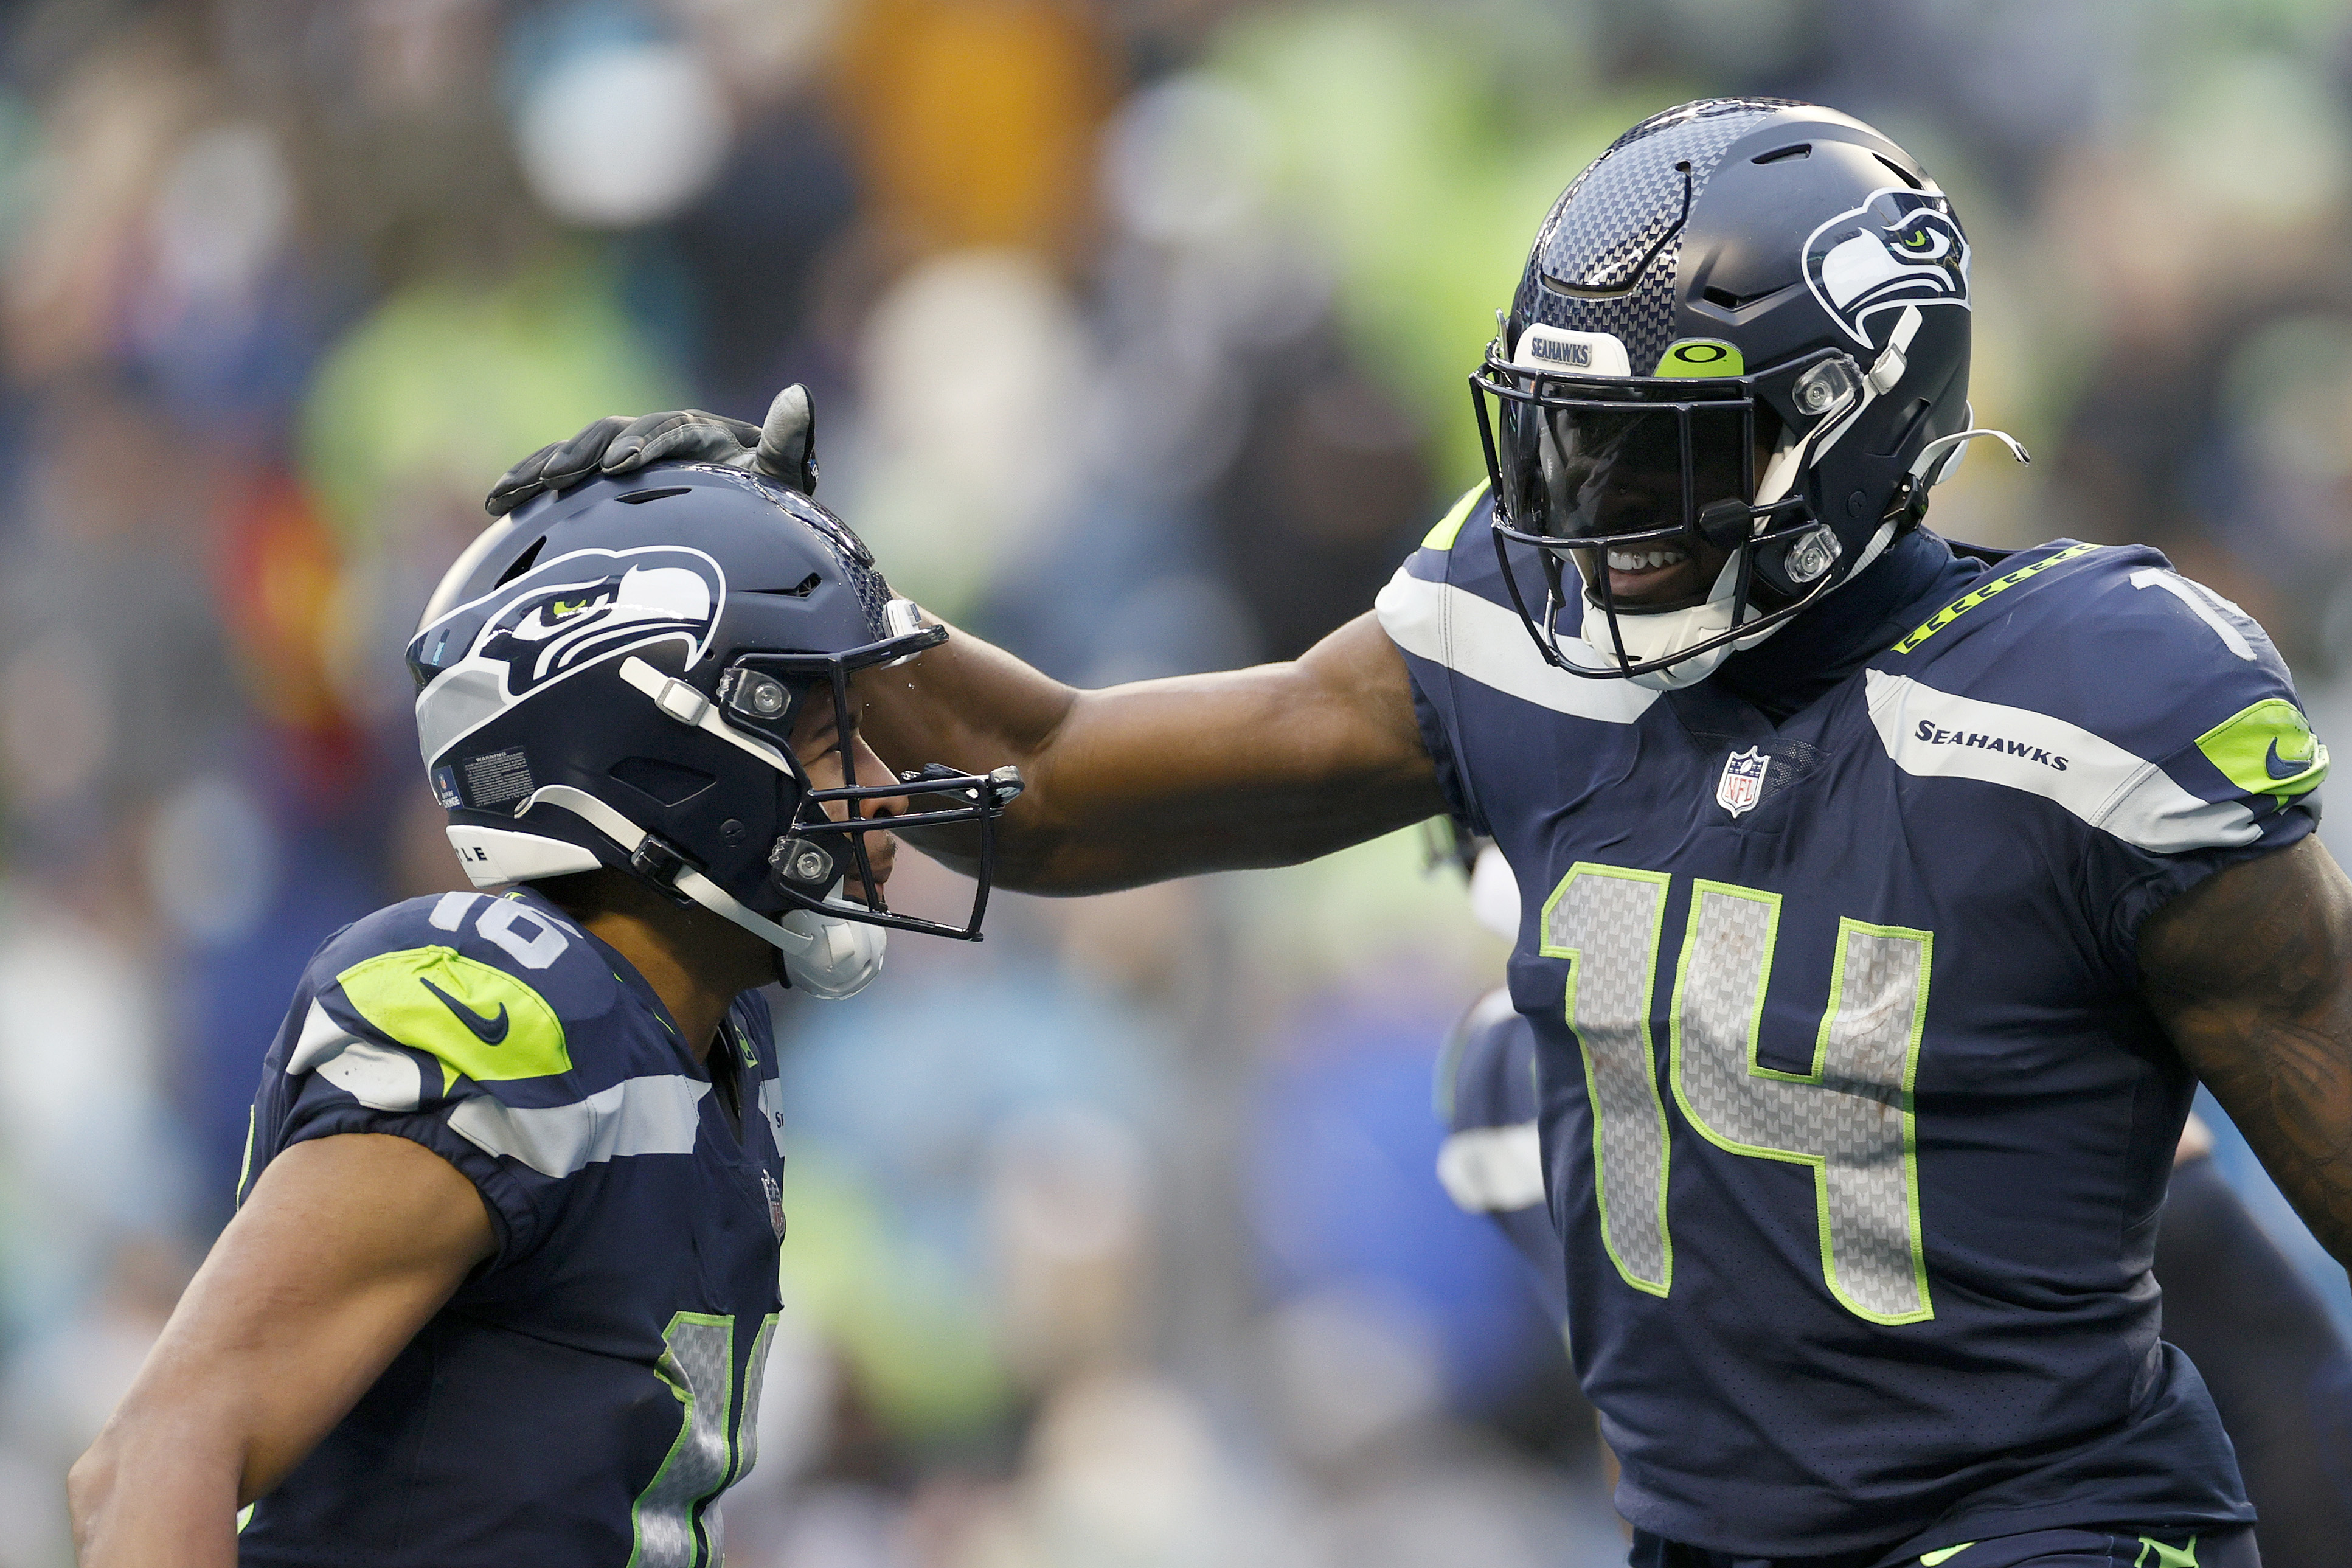 Tyler Lockett #16 and DK Metcalf #14 of the Seattle Seahawks celebrate a touchdown during the third quarter against the Detroit Lions at Lumen Field on January 02, 2022 in Seattle, Washington.